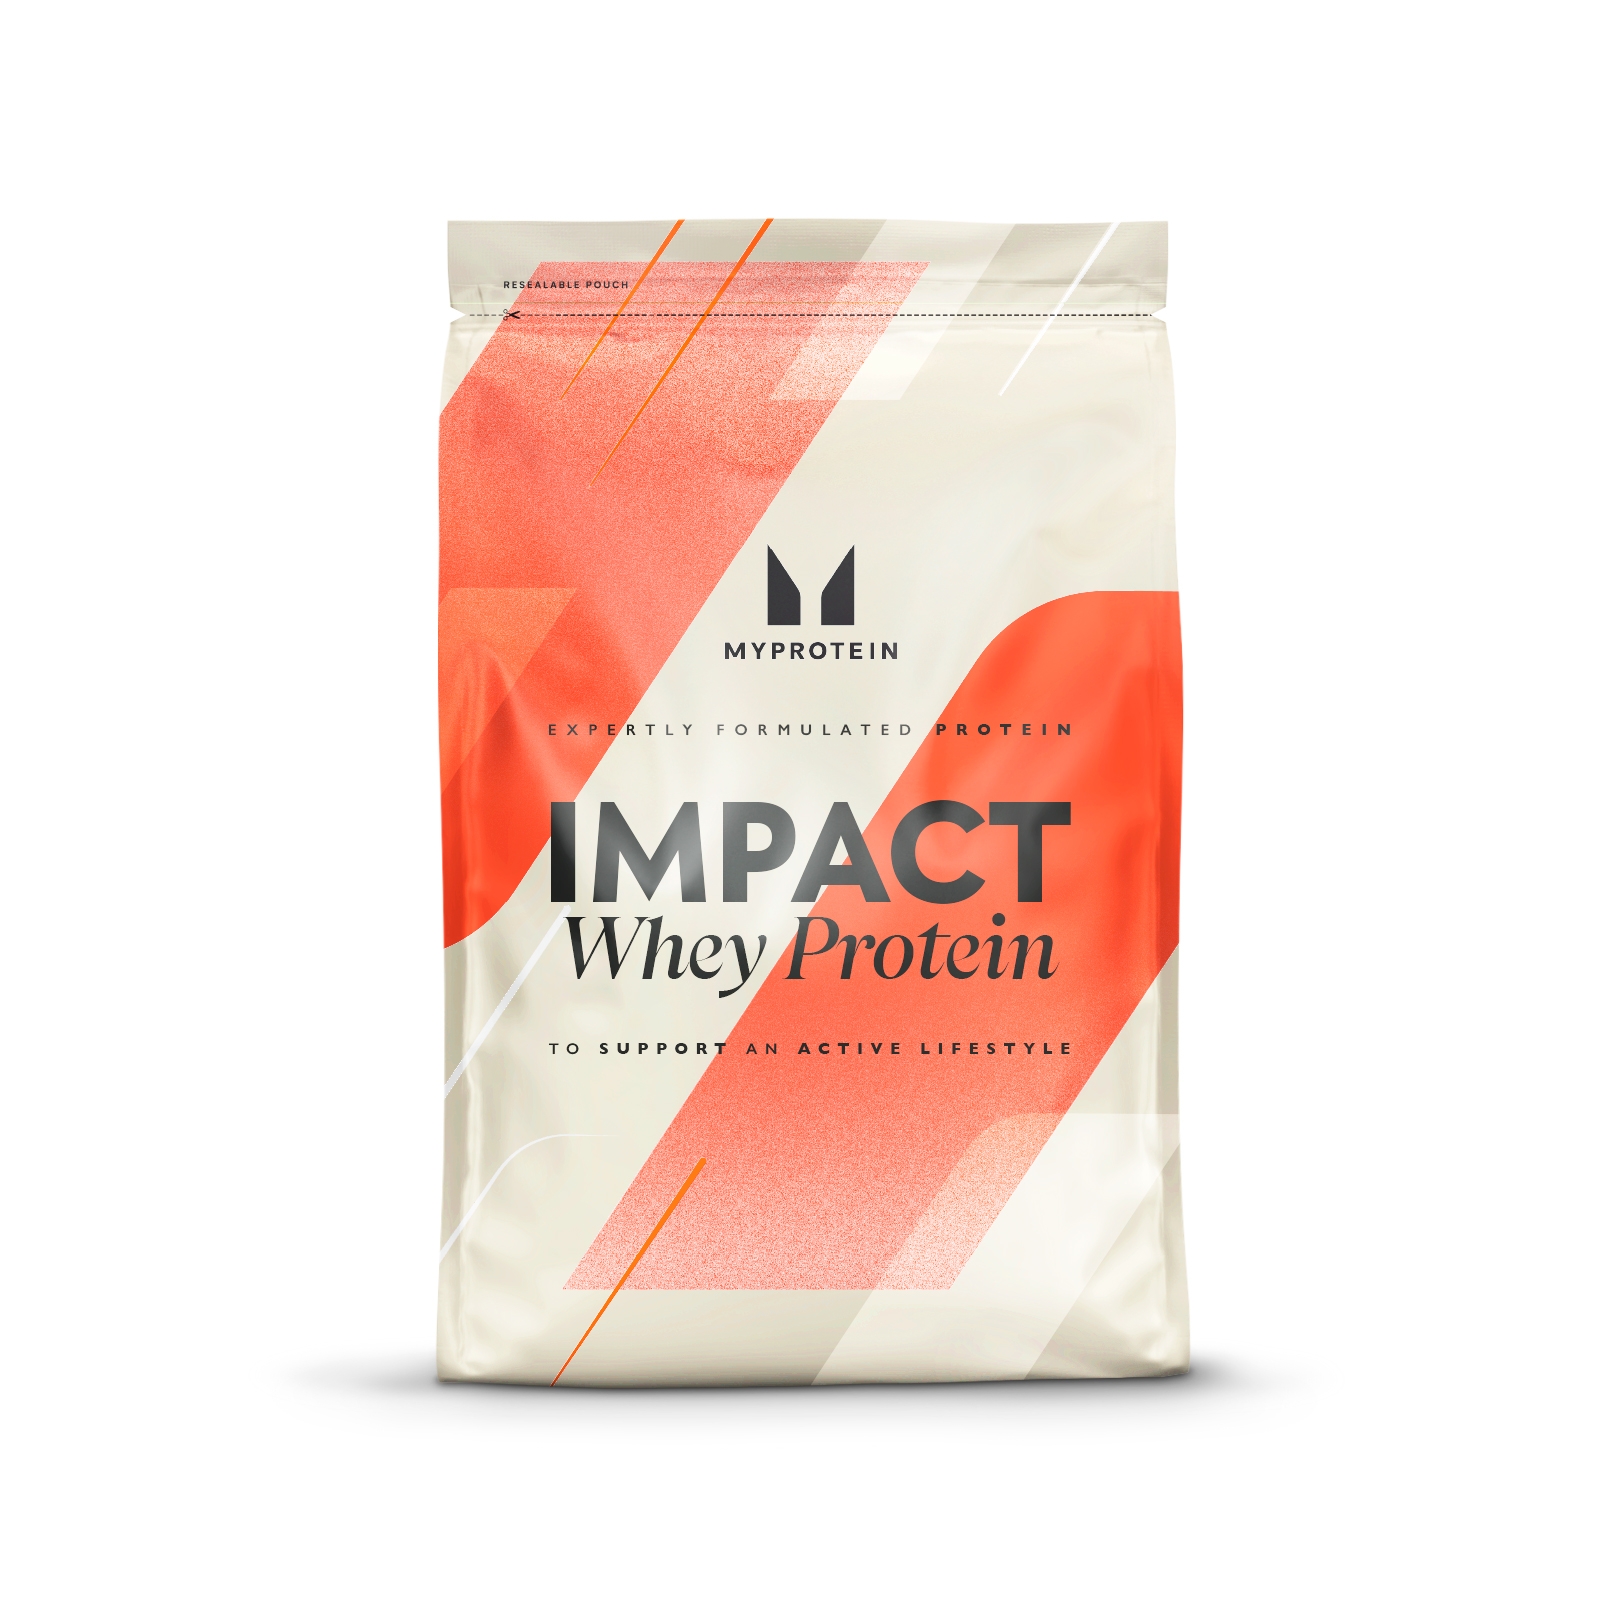 Image of Myprotein Impact Whey Protein - 25kg - Chocolate Suave 10530970 PT21